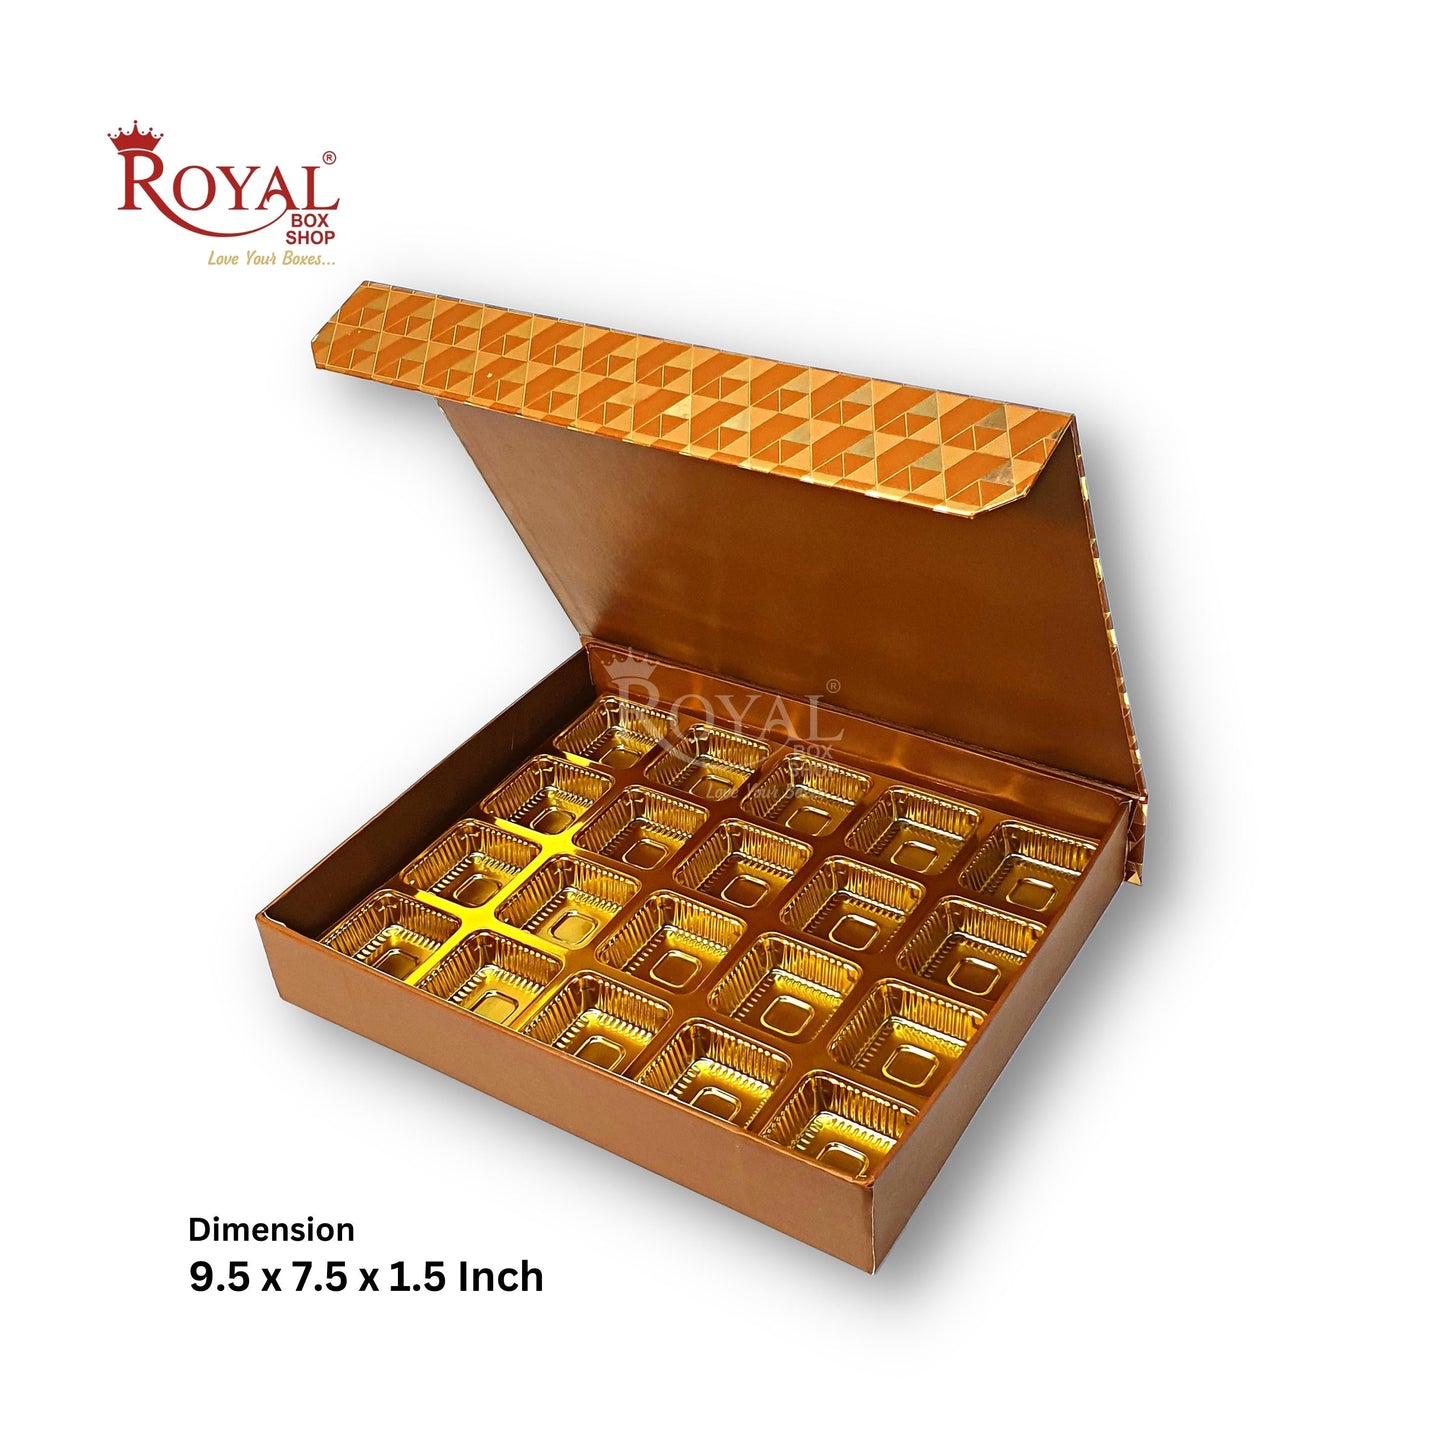 Rigid Chocolate Boxes 20 Cavity With Magnetic Flap I Brown with Gold Foiling I 9.5 X 7.5 X 1.5 Inch I Kappa Boxes Royal Box Shop